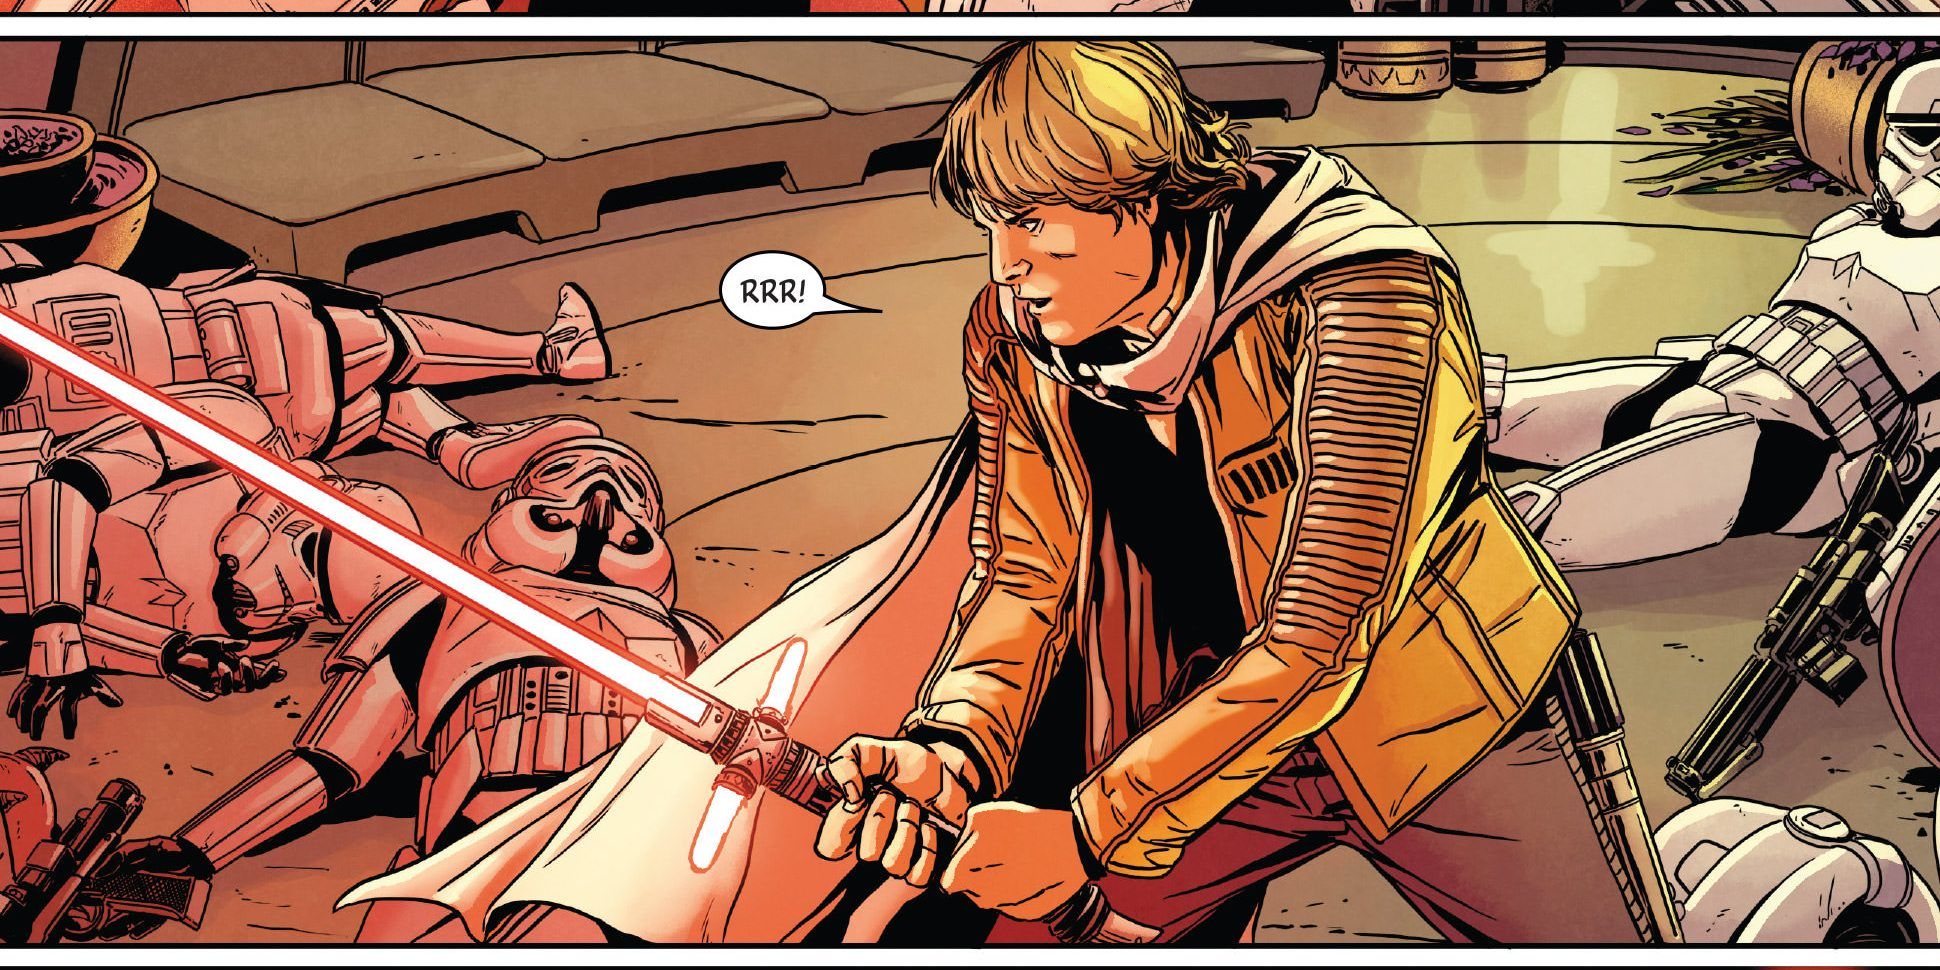 Darth Atrius holding a dual crossguard lightsaber in front of dead Stormtroopers